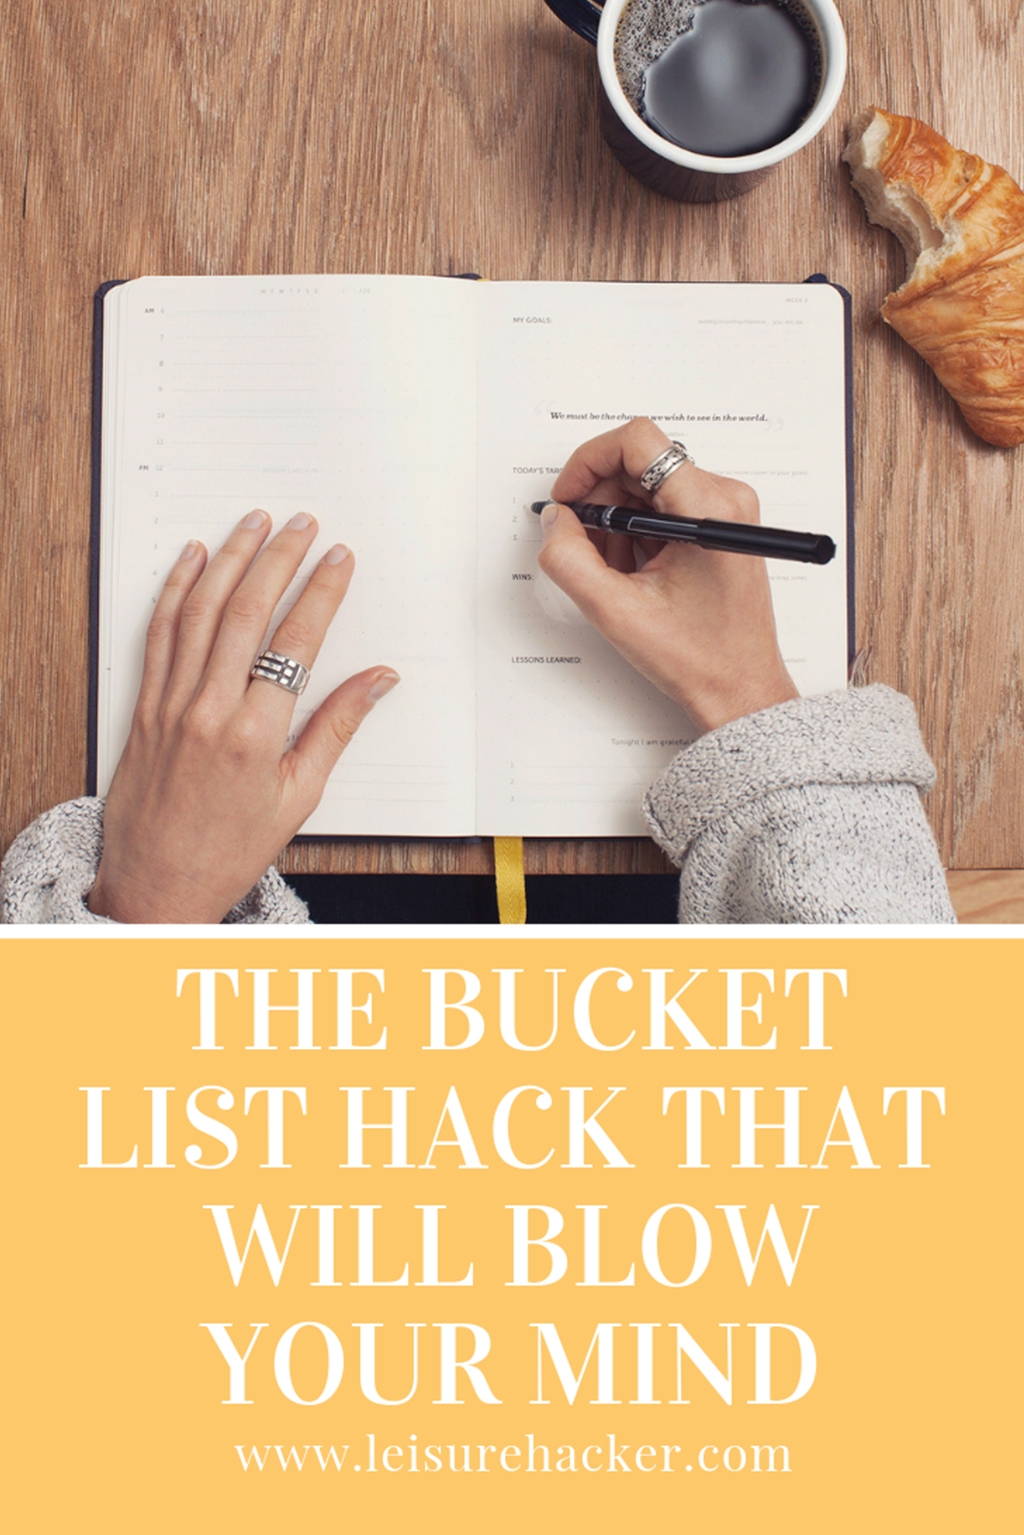 The bucket list hack that will blow your mind